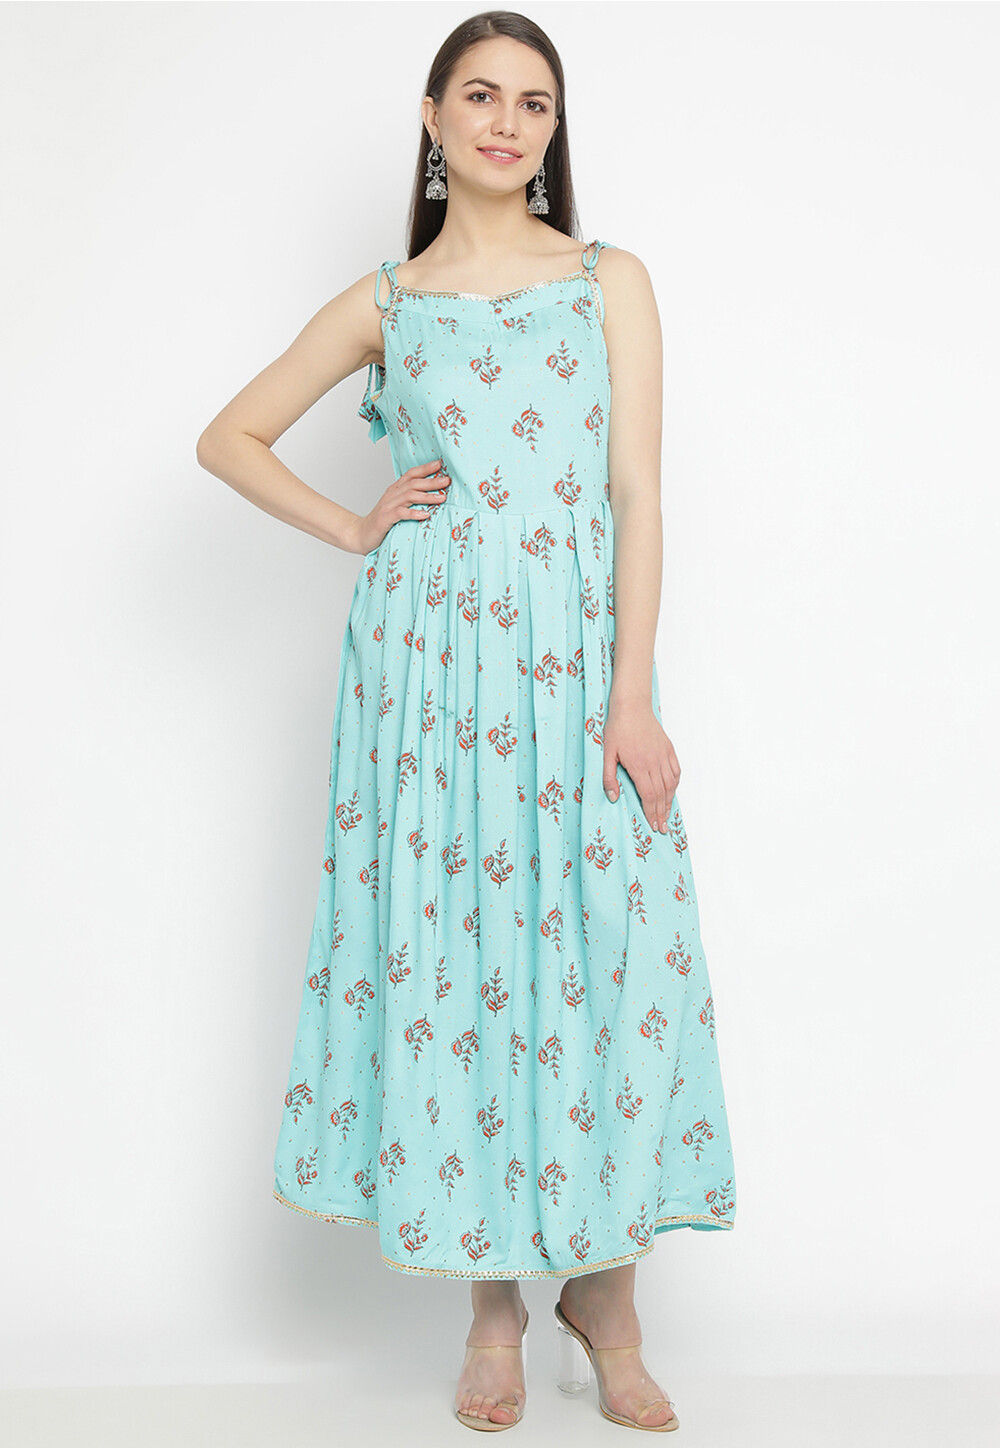 Printed Sky Blue One Piece Dress 00032, Half Sleeves, Casual Wear at Rs 230/ piece in Surat